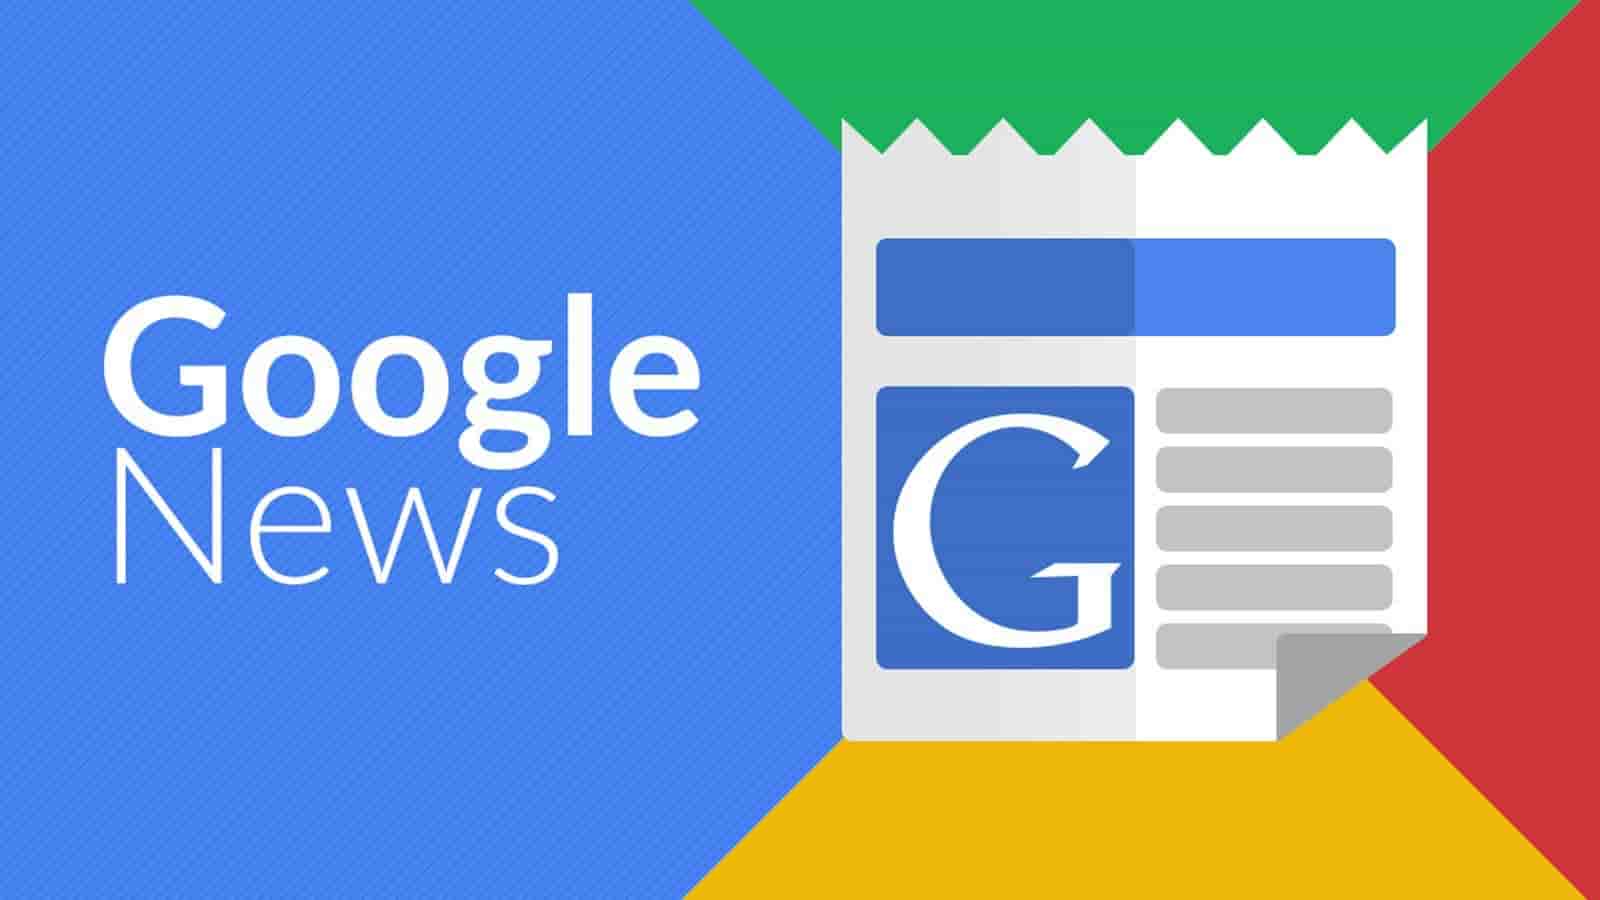 How to Post Your Article to Google News